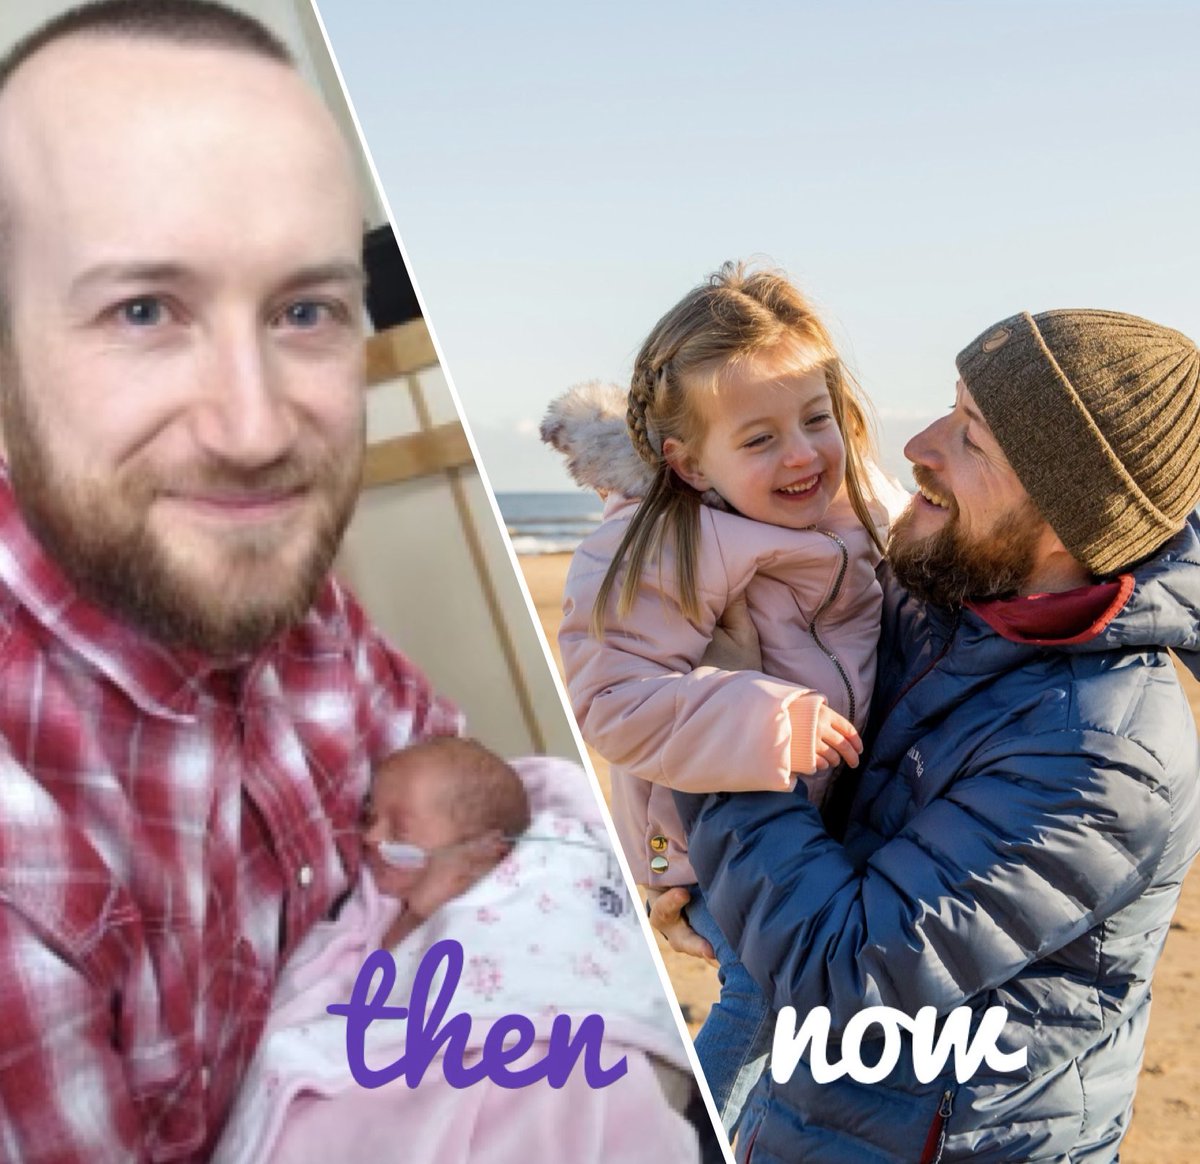 Here’s Dads Team member Steve with Phoebe, who was born in 2015 - a little wonder girl then and now! #worldprematurityday #preemiepower